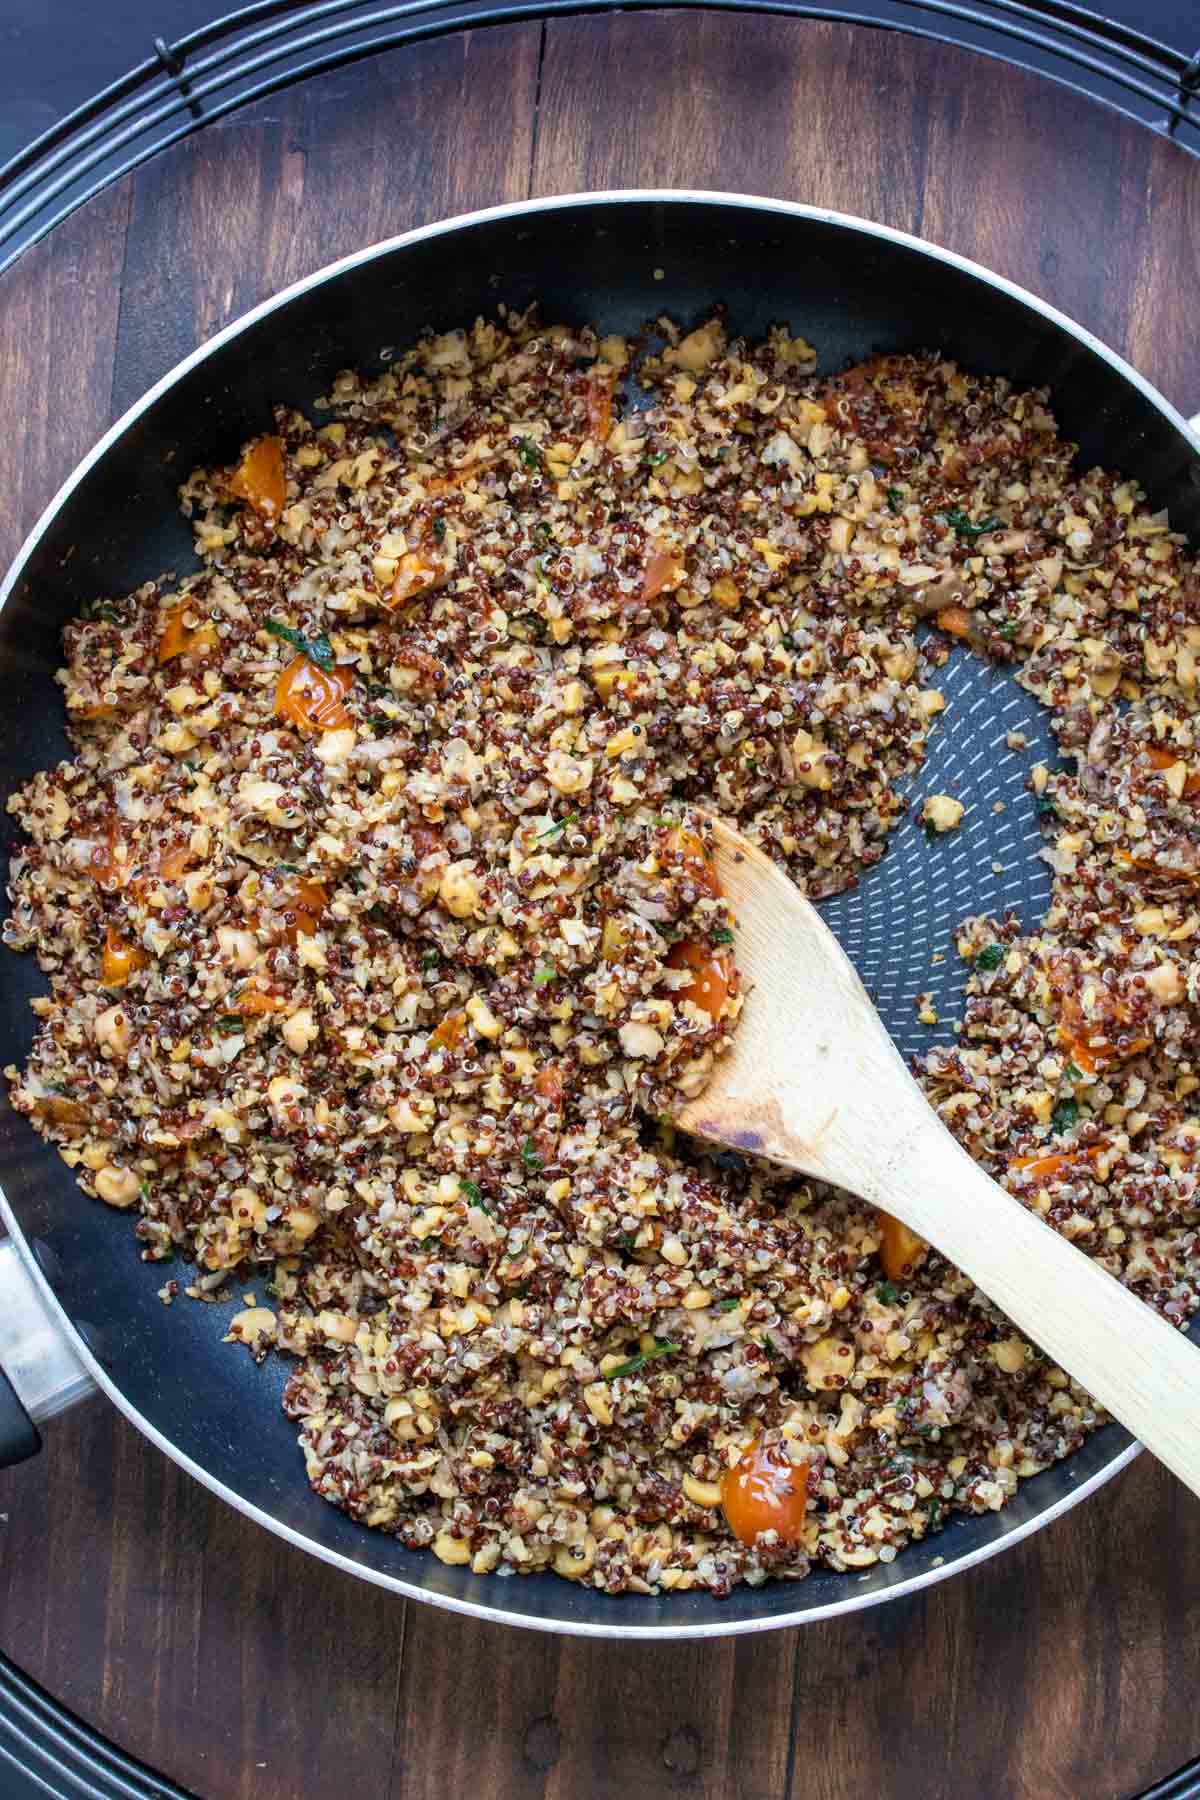 Spoon mixing quinoa with chopped mushrooms and chickpeas in a pan